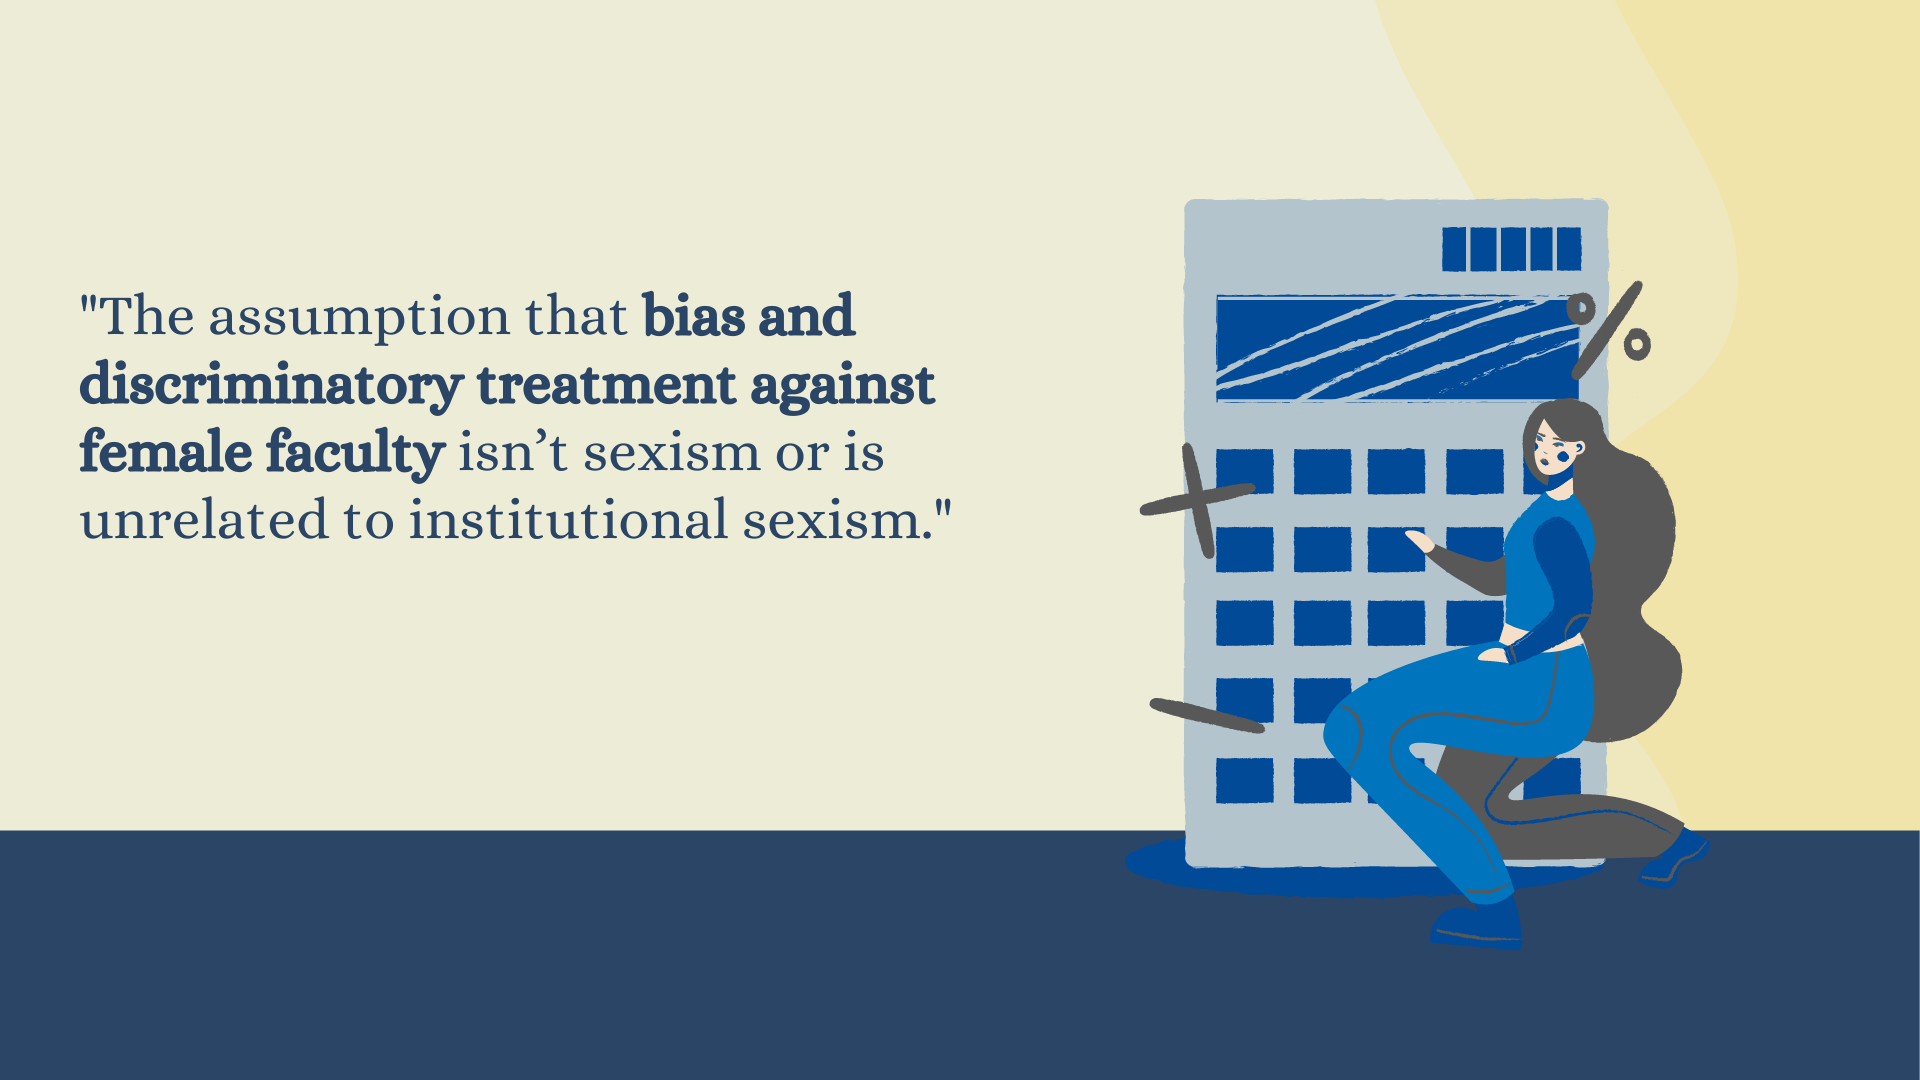 Image with the text "The assumption that bias and discriminatory treatment against female faculty isn’t sexism or is unrelated to institutional sexism. "